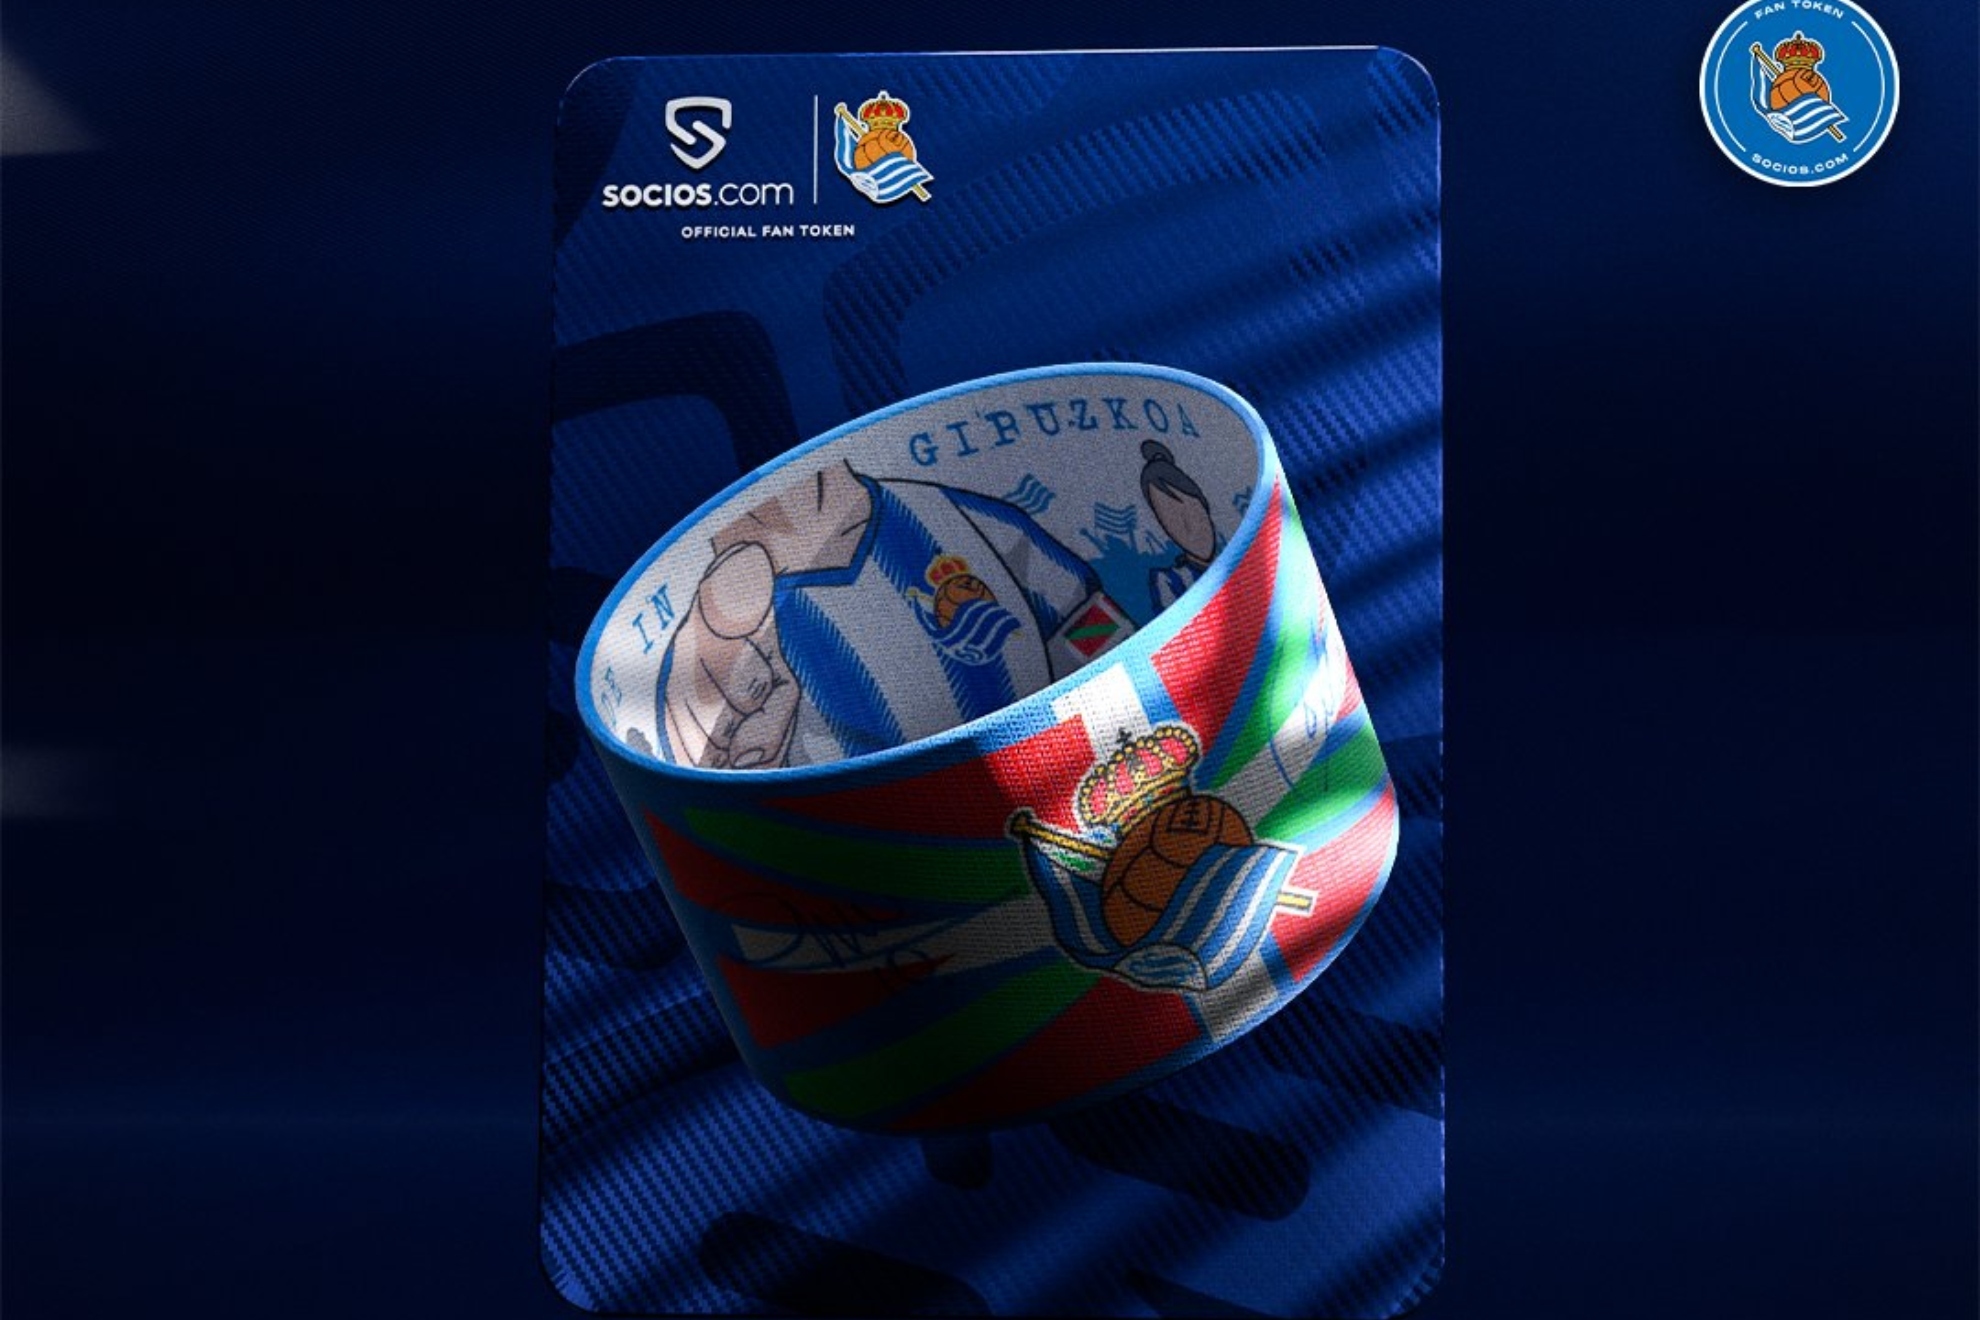 Fan Token holders can become 'captains' of Real Sociedad